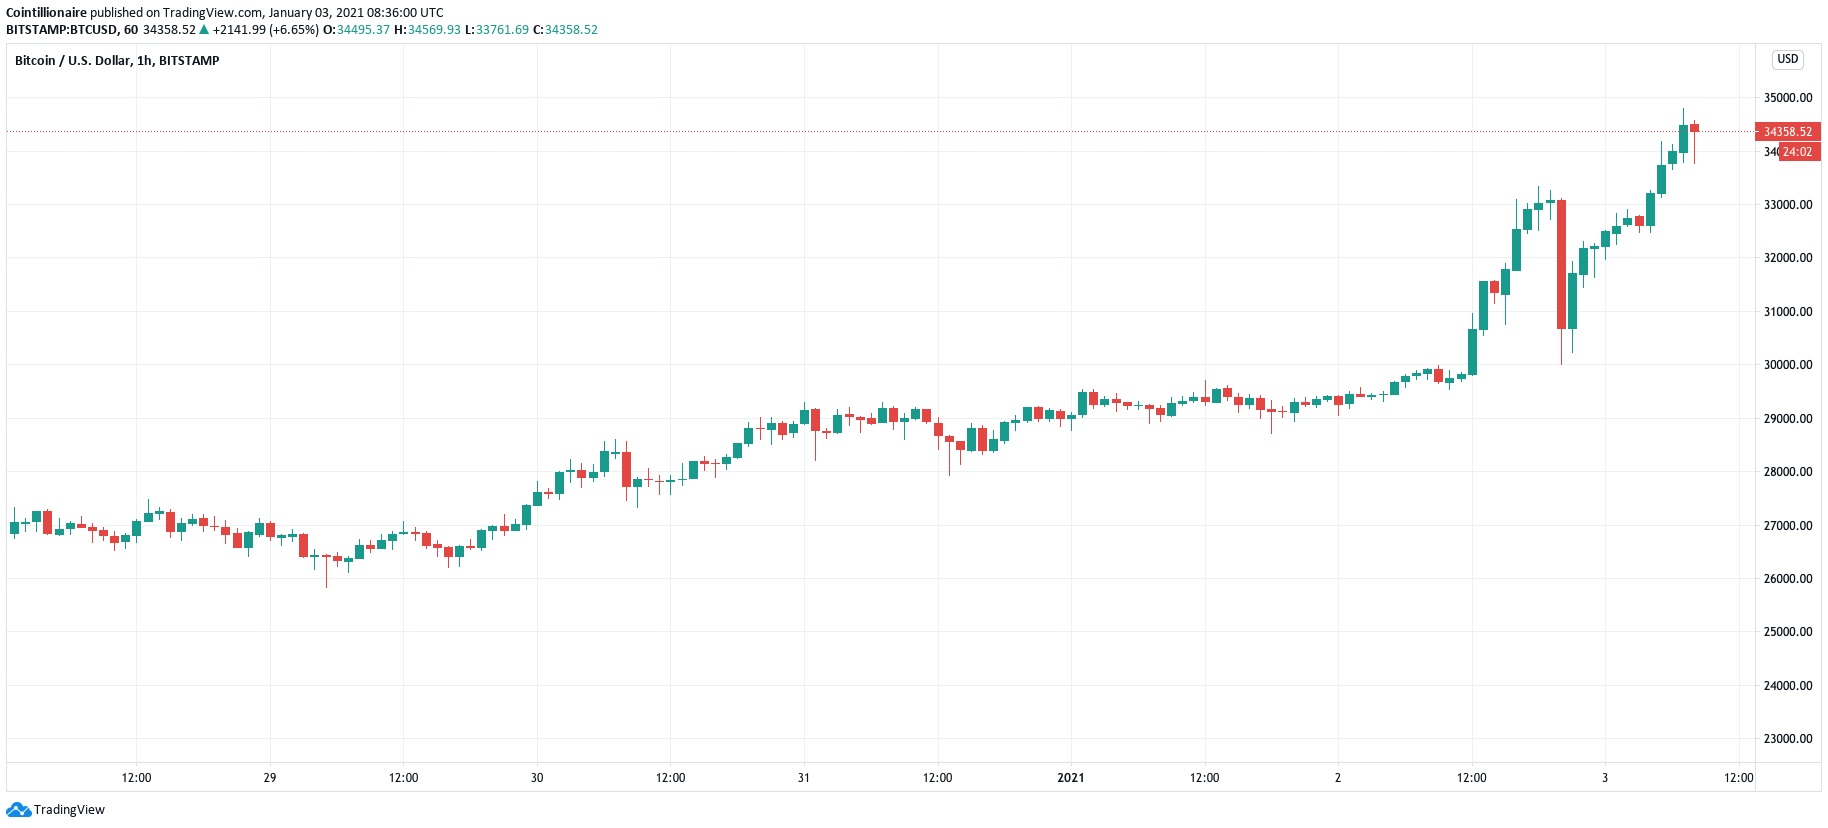 BTC/USD hourly candle chart (Bitstamp)